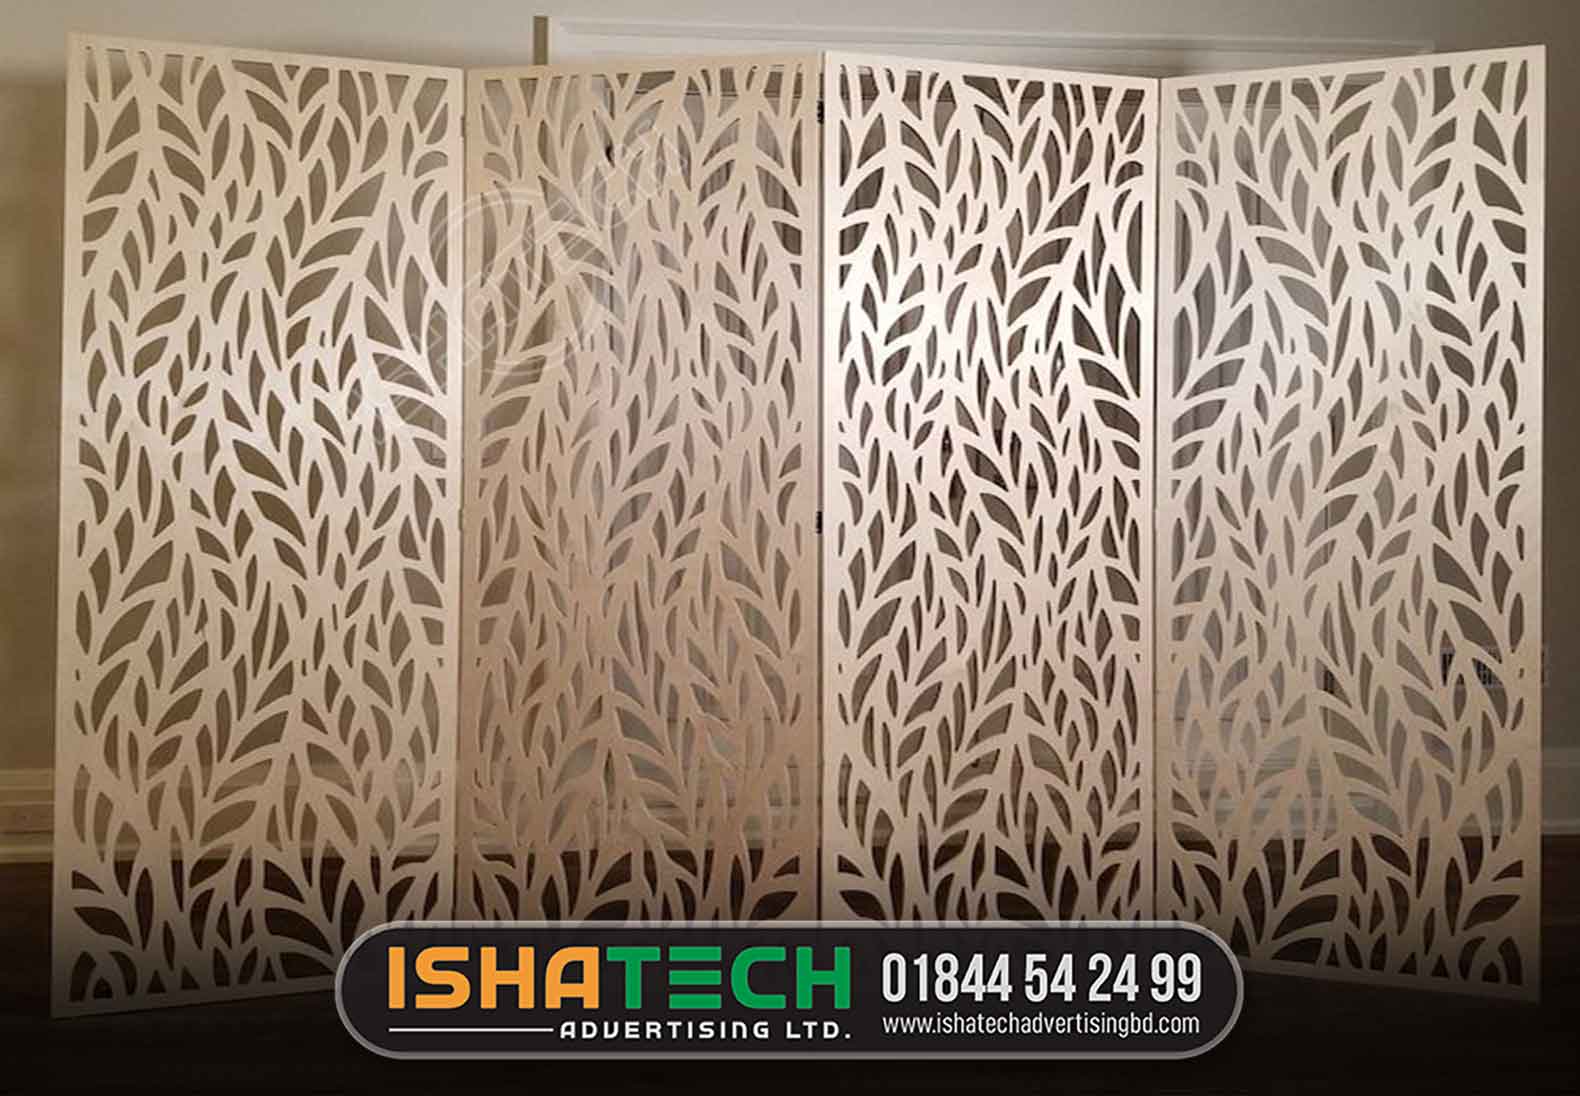 Most beautiful Leasercut wood work interior partition panel design for drawingroom & main entrance design and cutting by ishatech advertising ltd